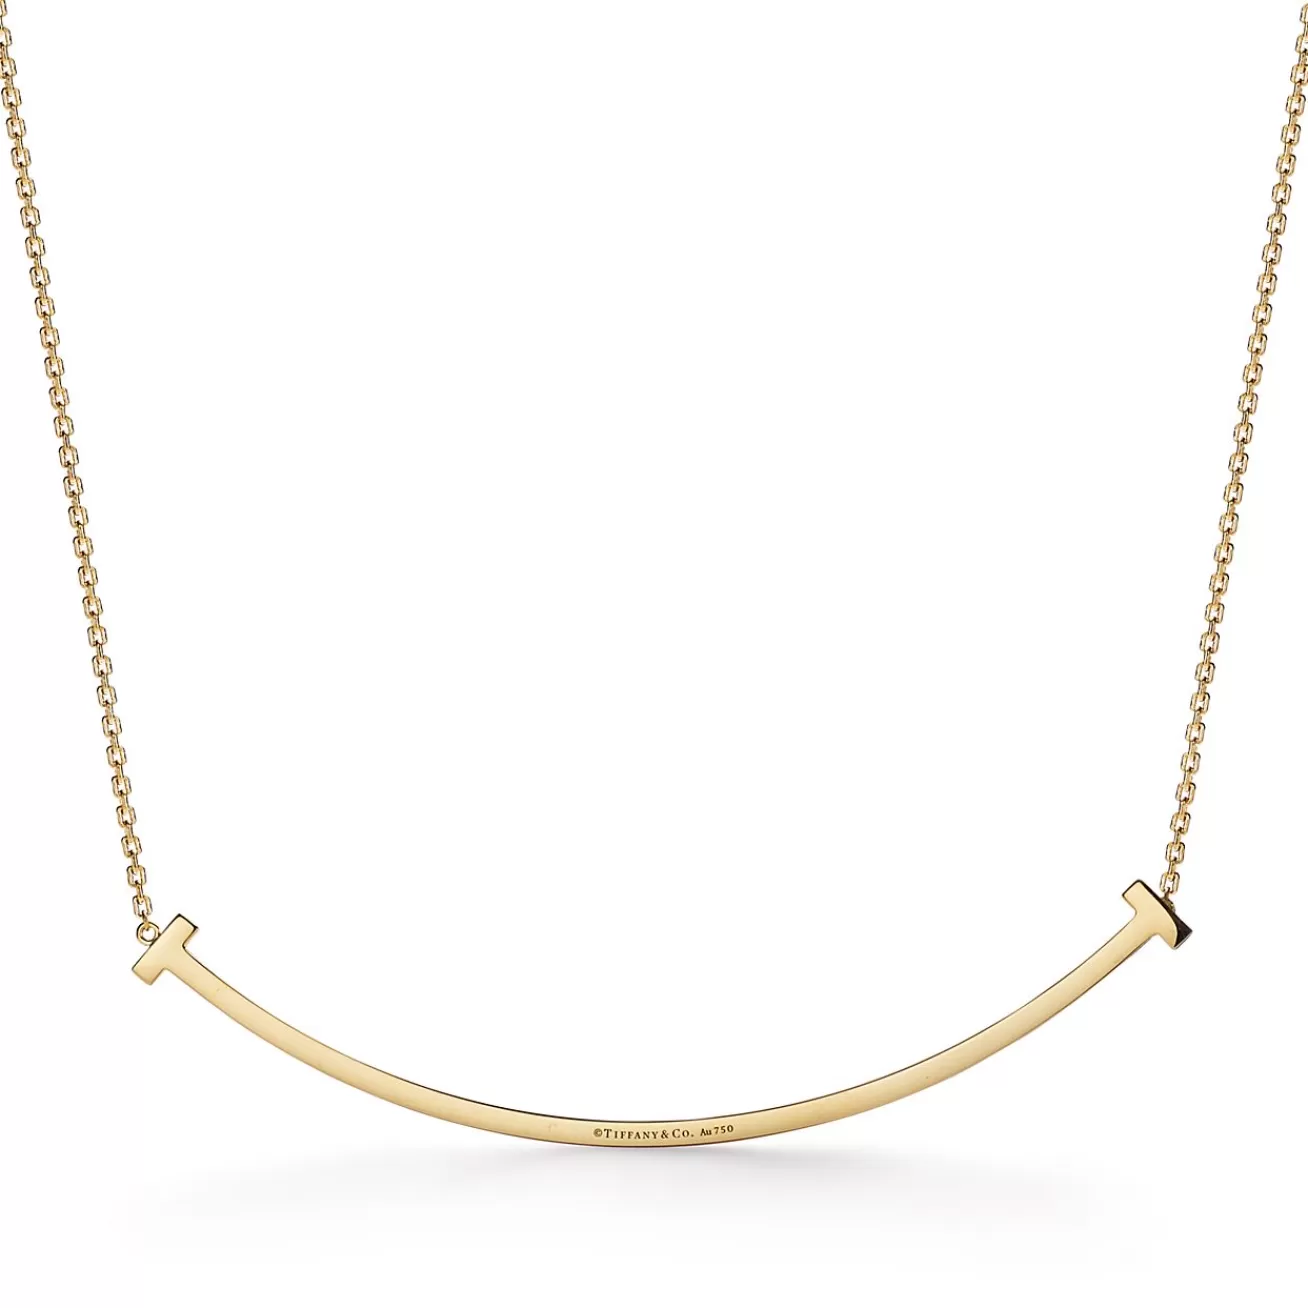 Tiffany & Co. Tiffany T extra large smile pendant in 18k gold with diamonds. | ^ Necklaces & Pendants | Men's Jewelry